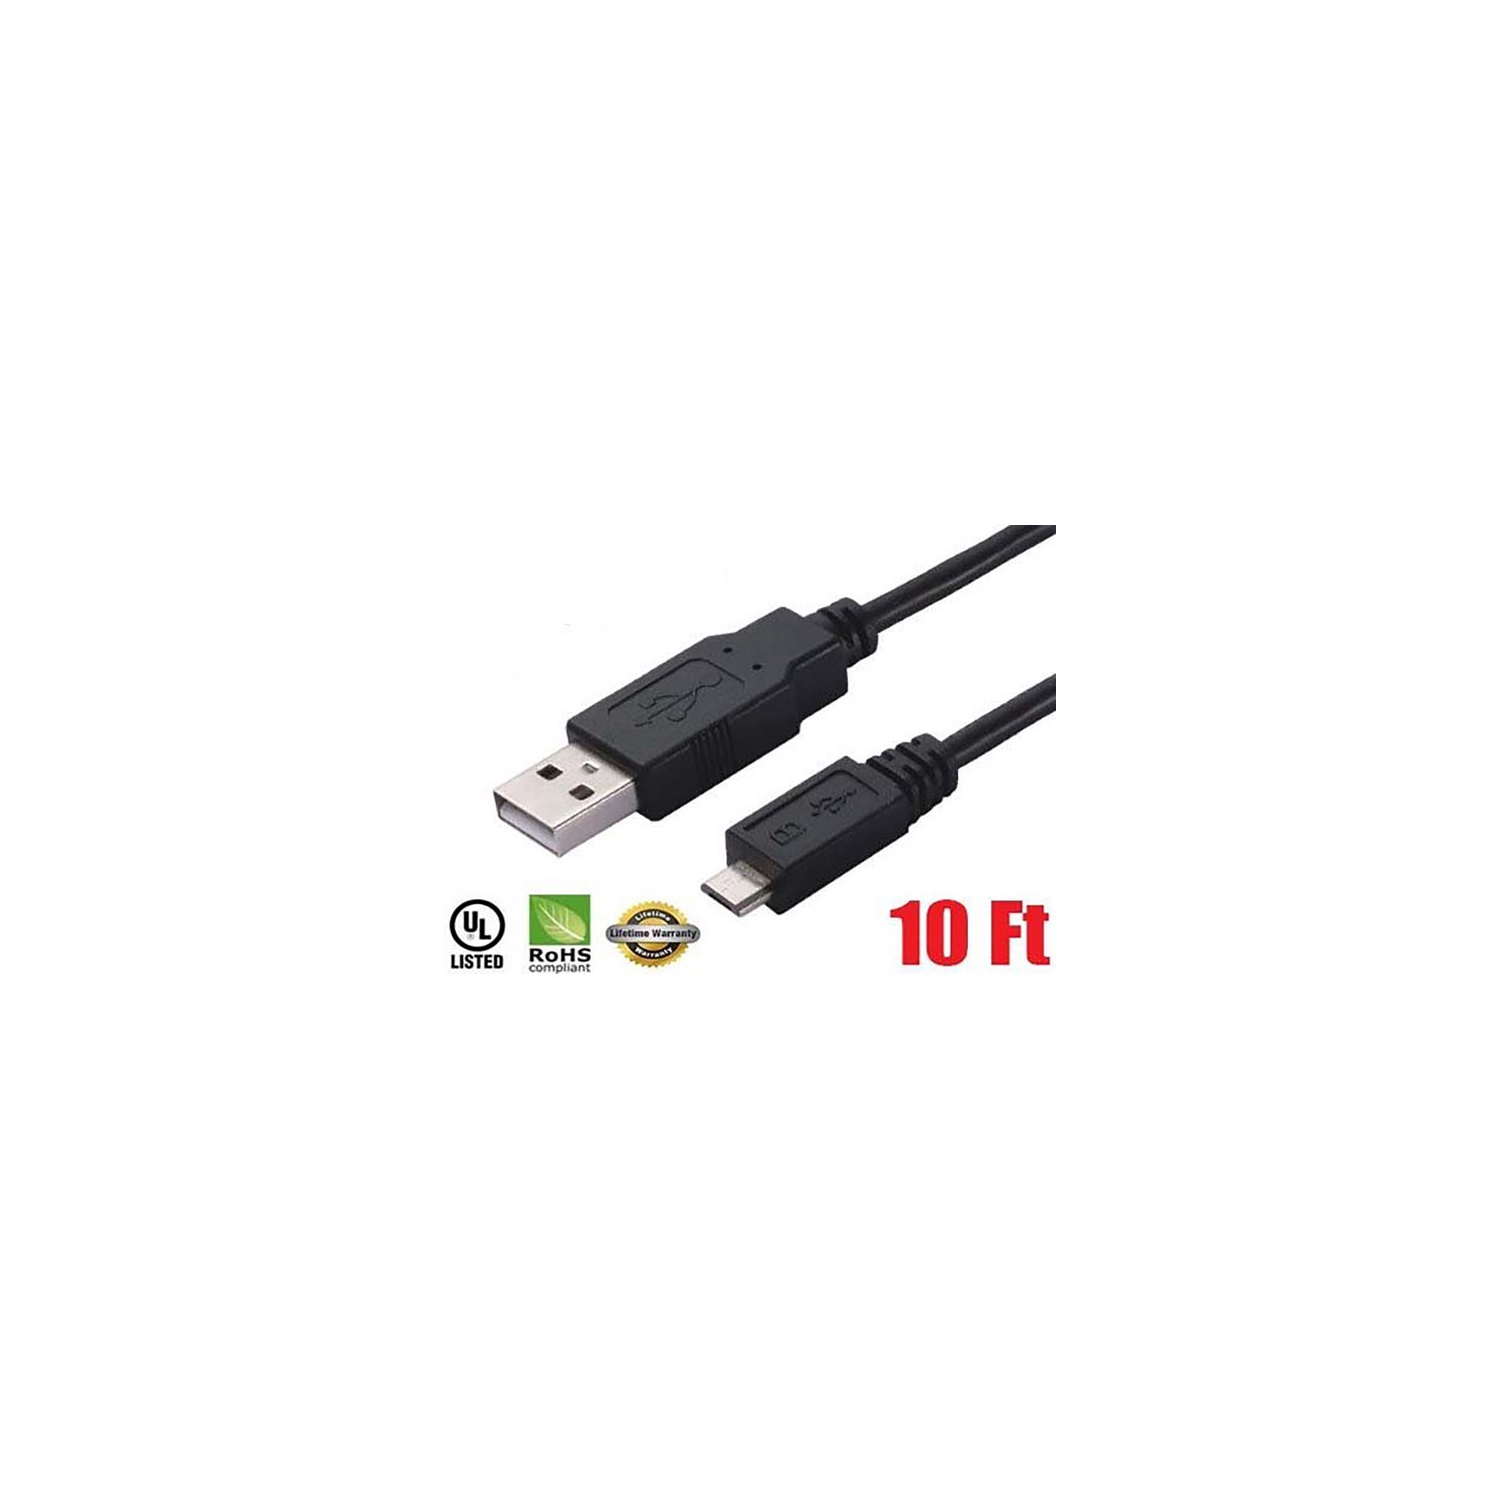 iMBAPrice 10 Feet USB to Micro USB Cable for HTC One/S/V/X/X+, EVO 4G LTE, EVO Design 4G, INCREDIBLE 4G LTE, Droid DNA,